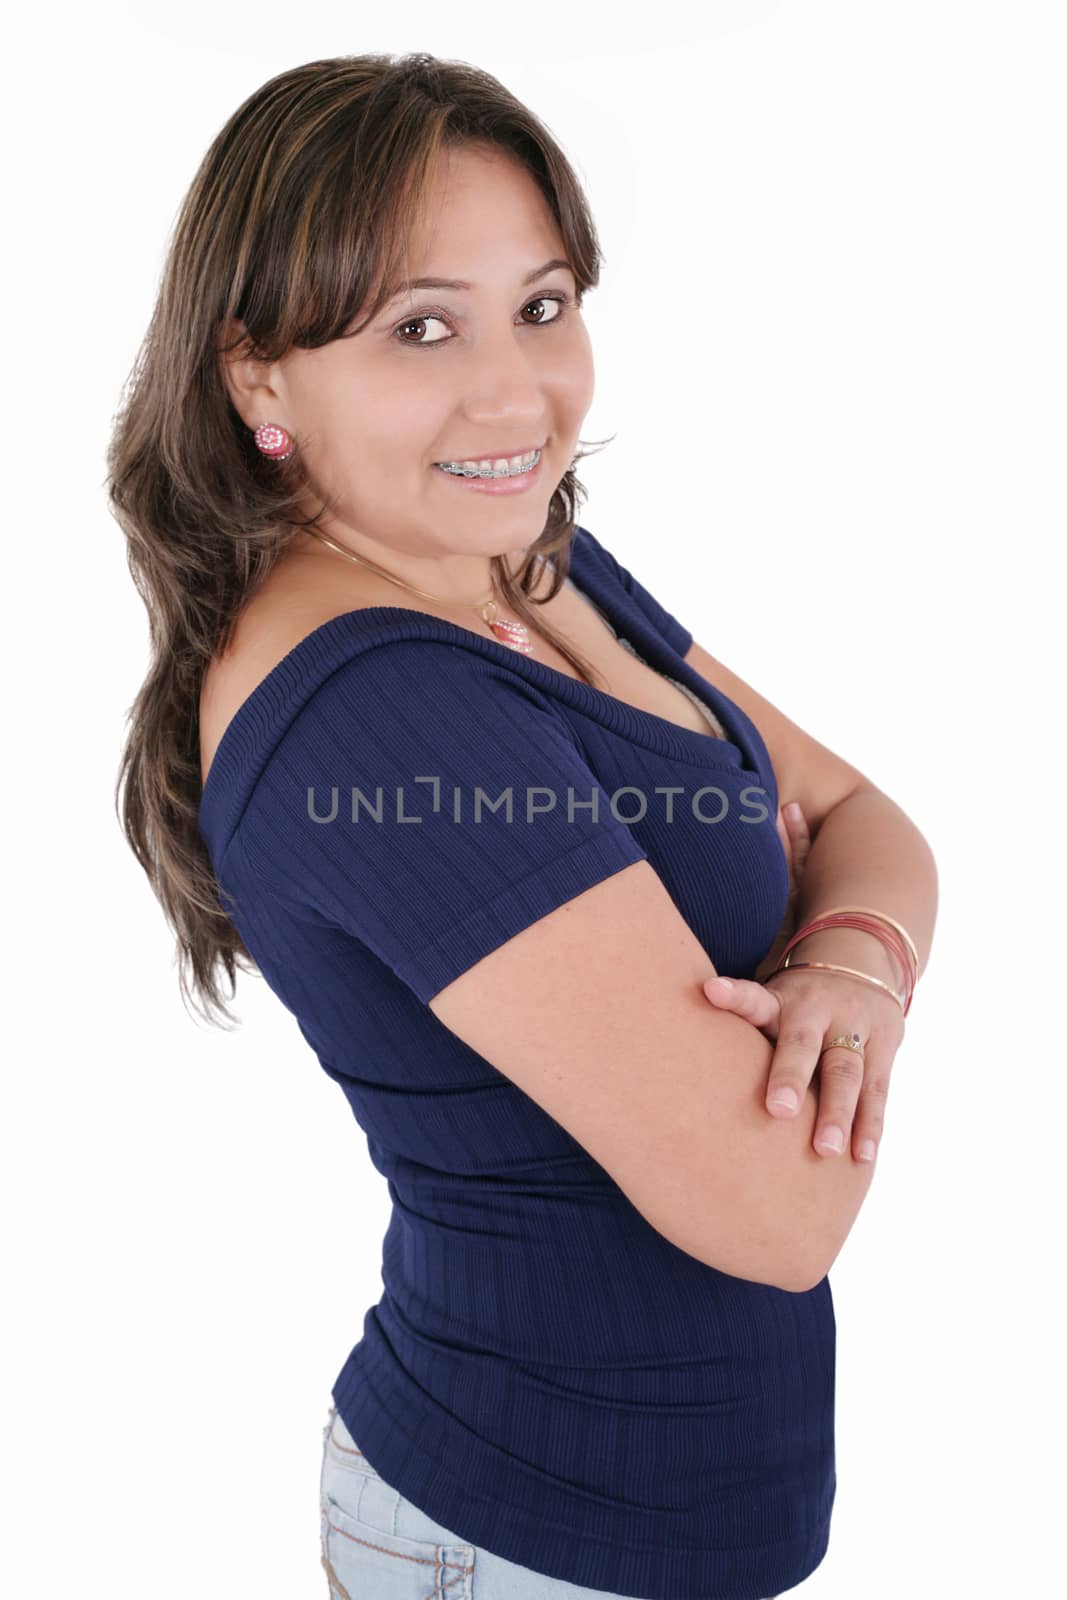 Smiling business woman. Isolated over white background